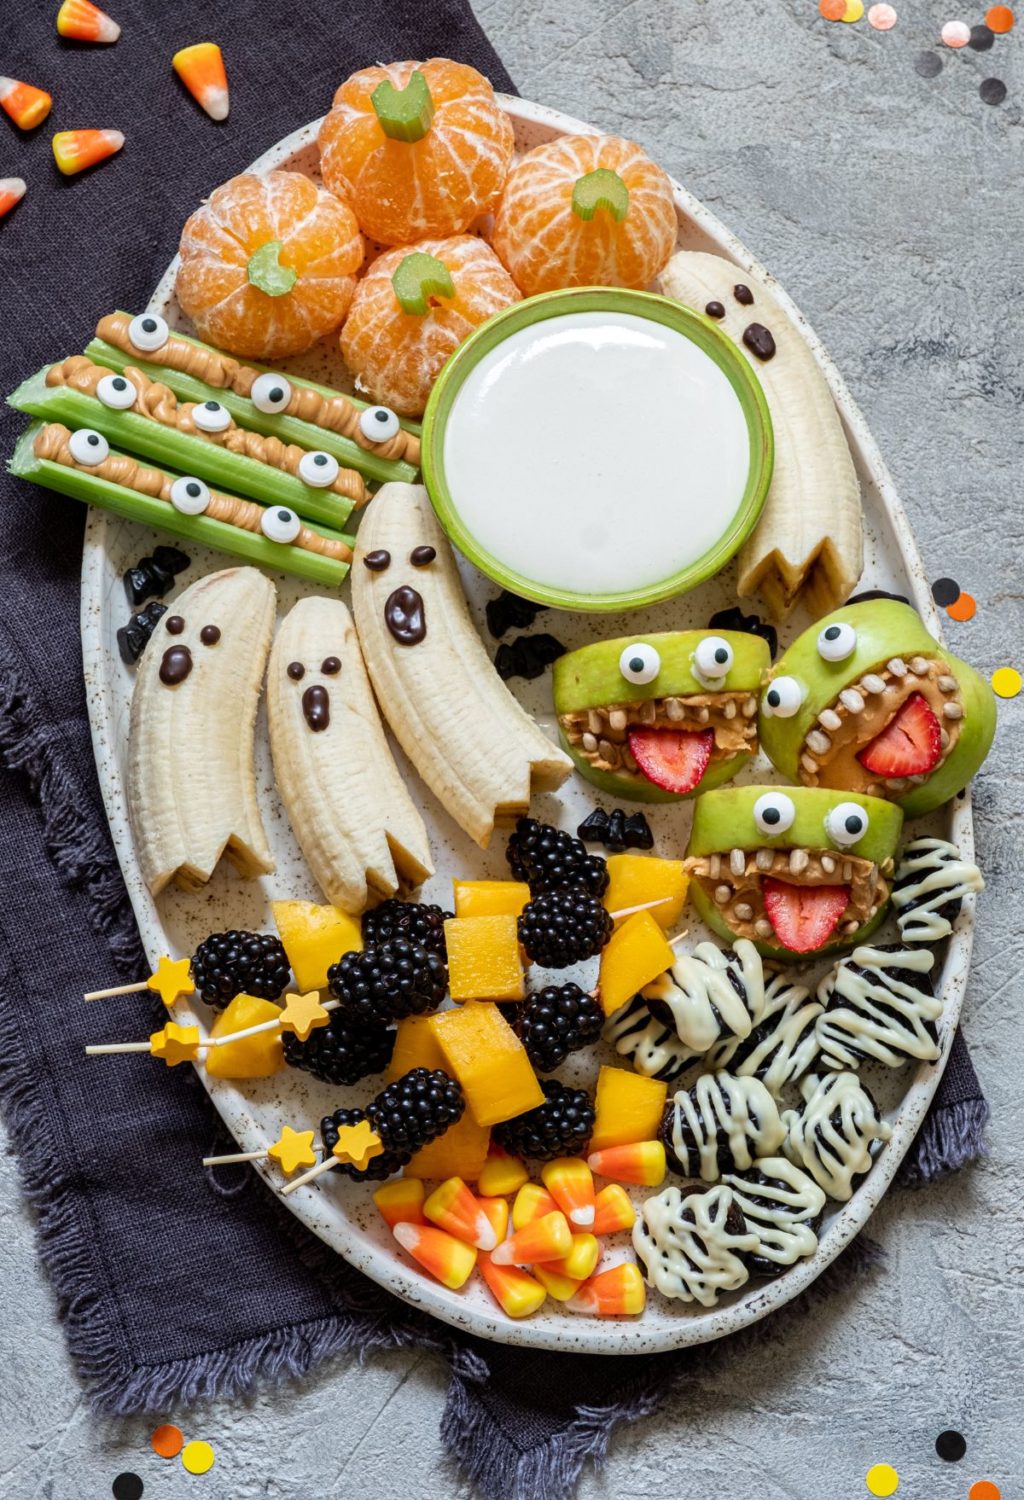 A plate of halloween snacks with bananas, apples, and oranges.